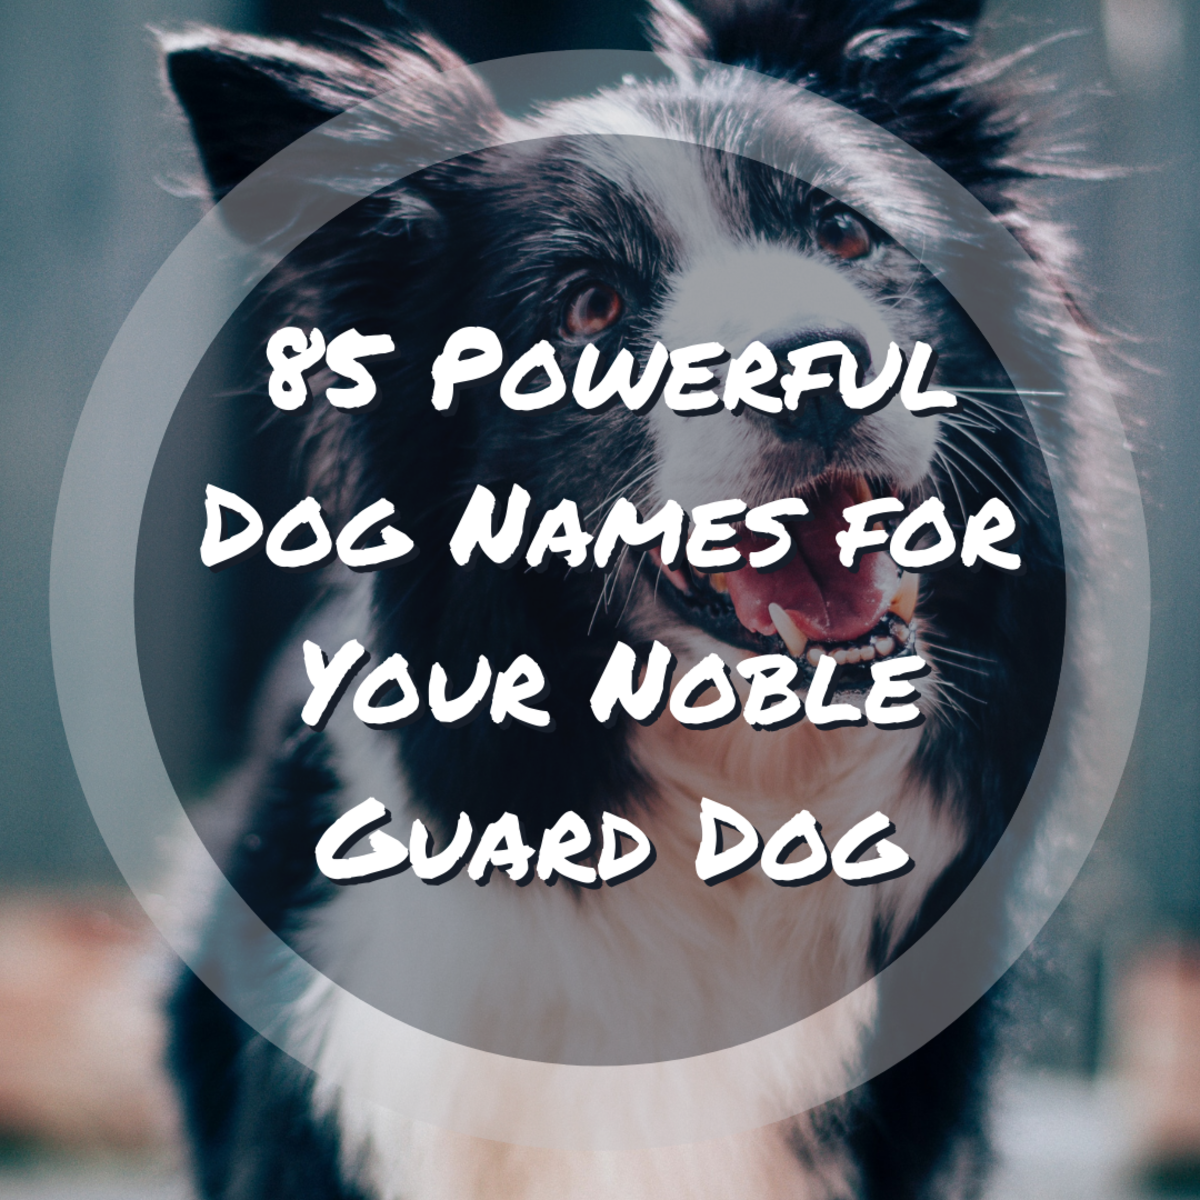 This article provides 85 great names for your powerful guard dog.